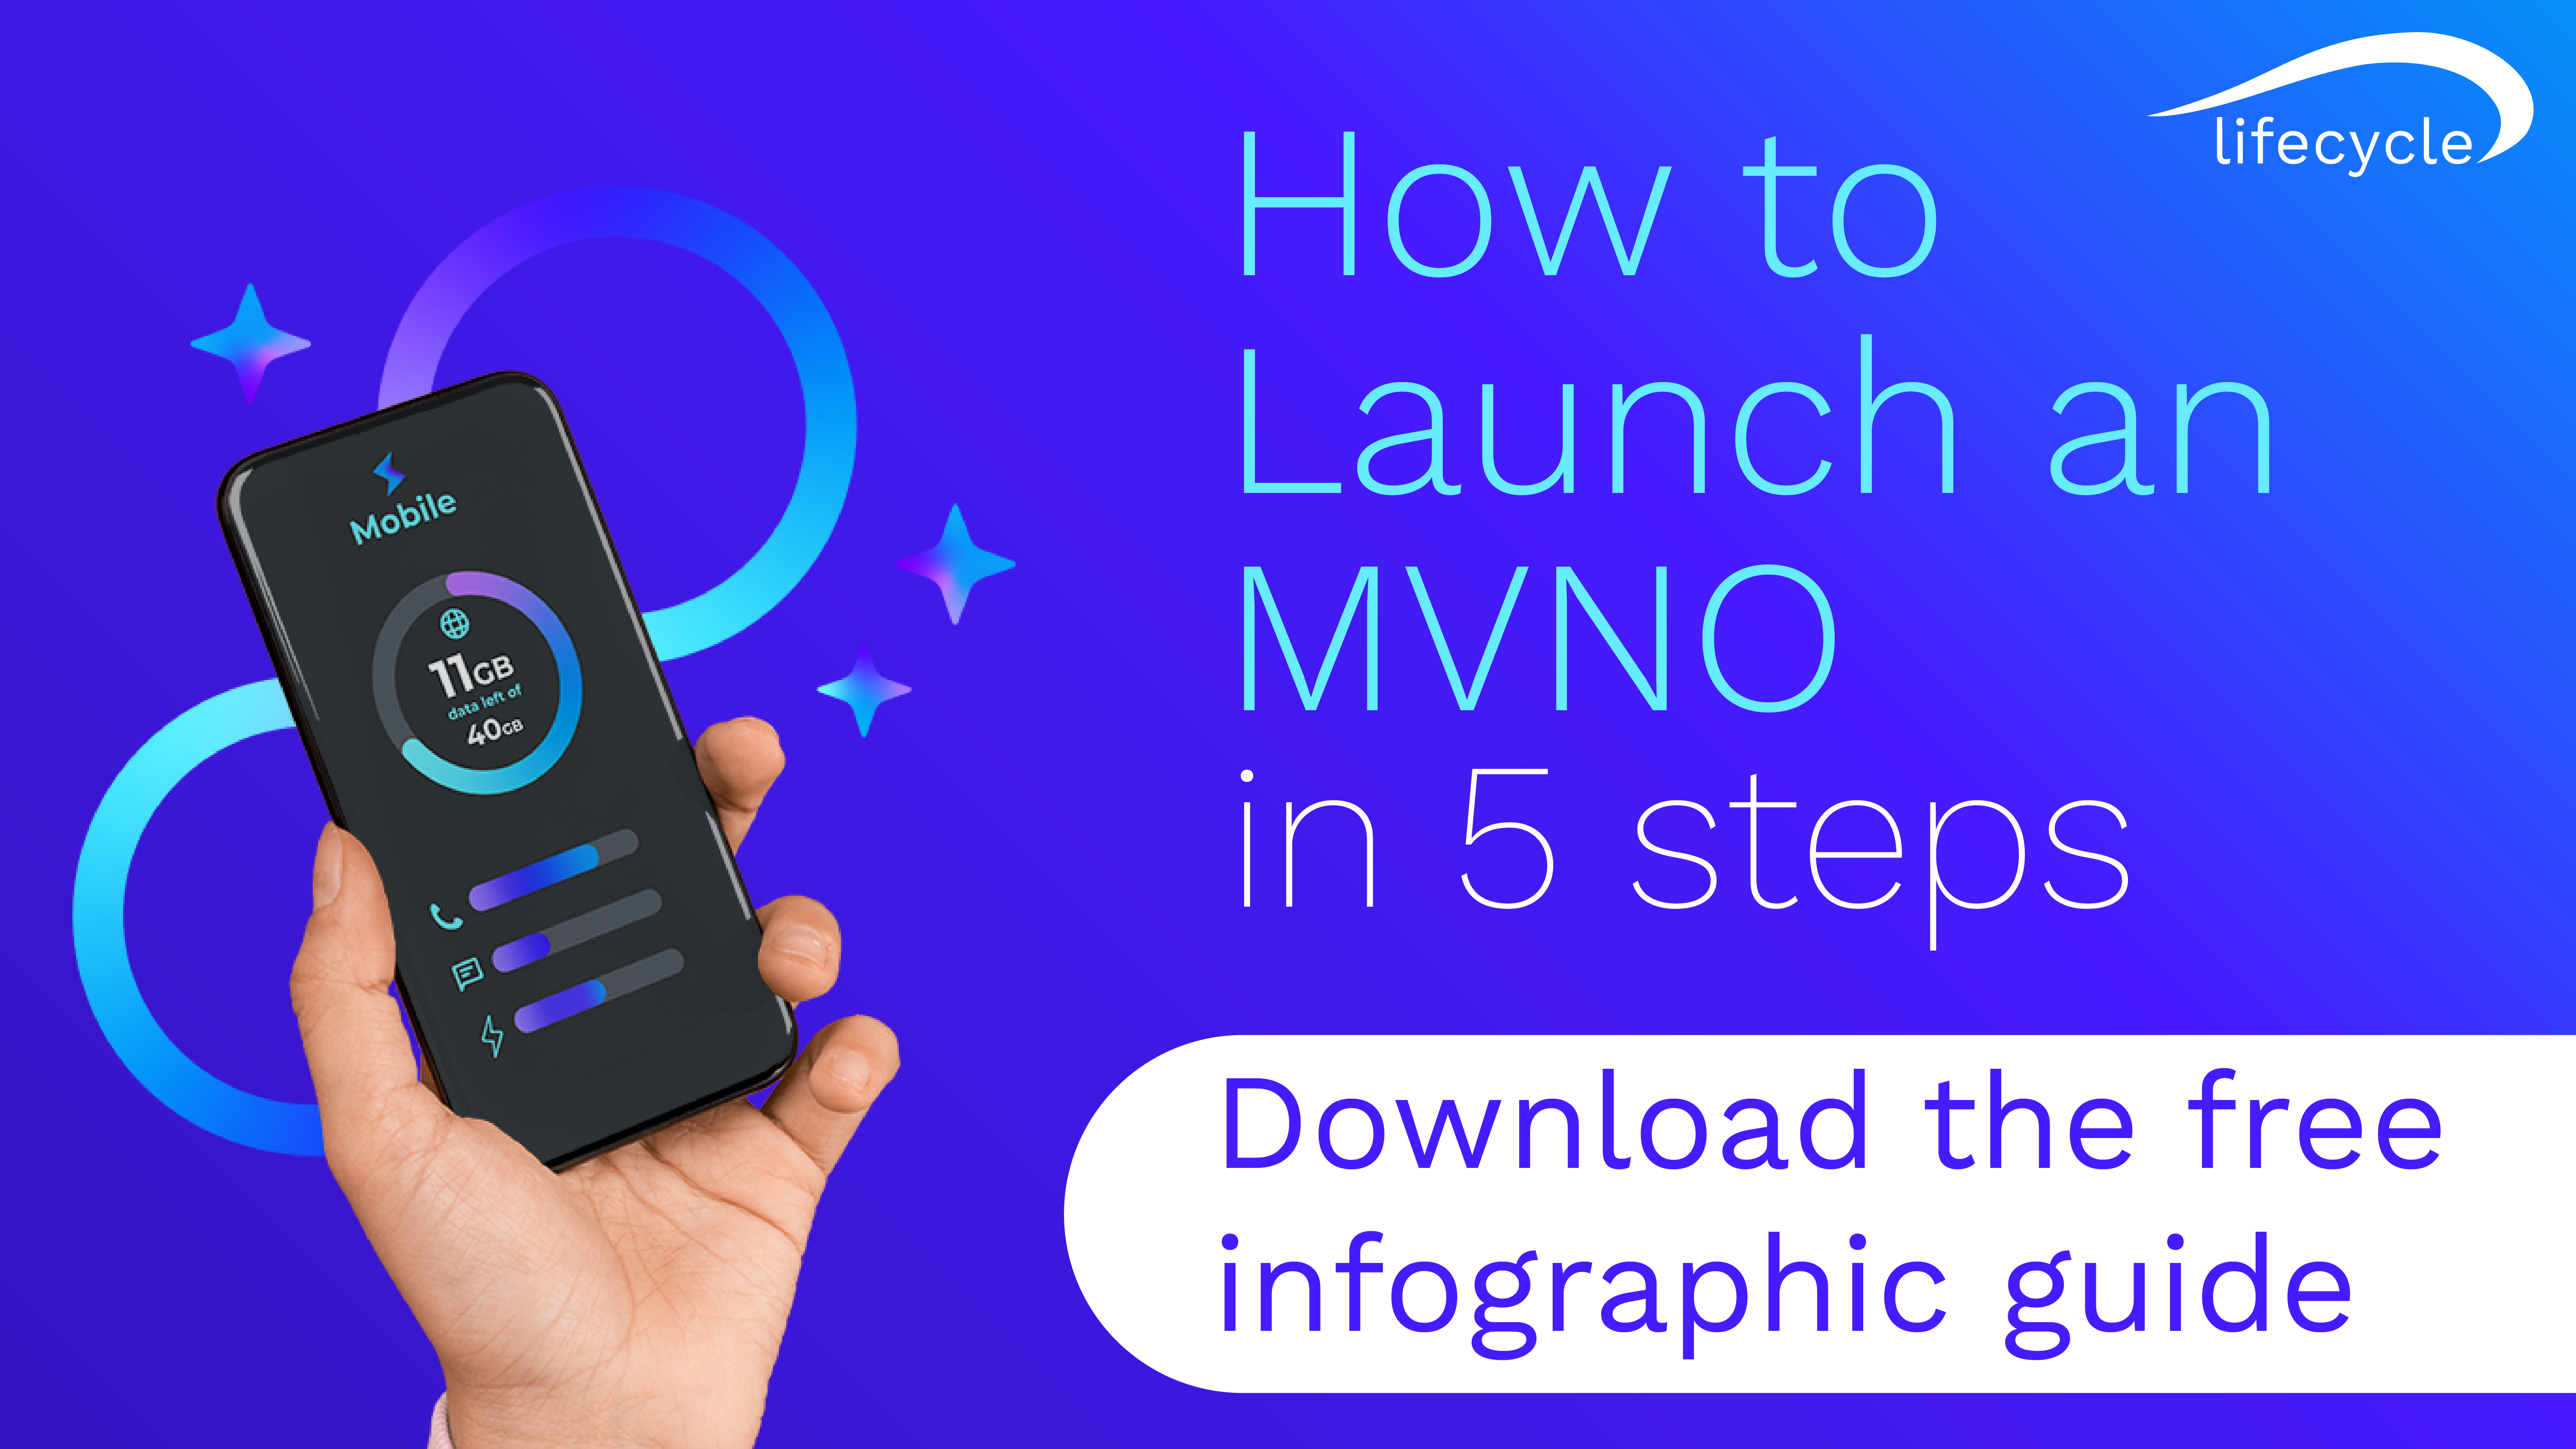 How to launch a MVNO